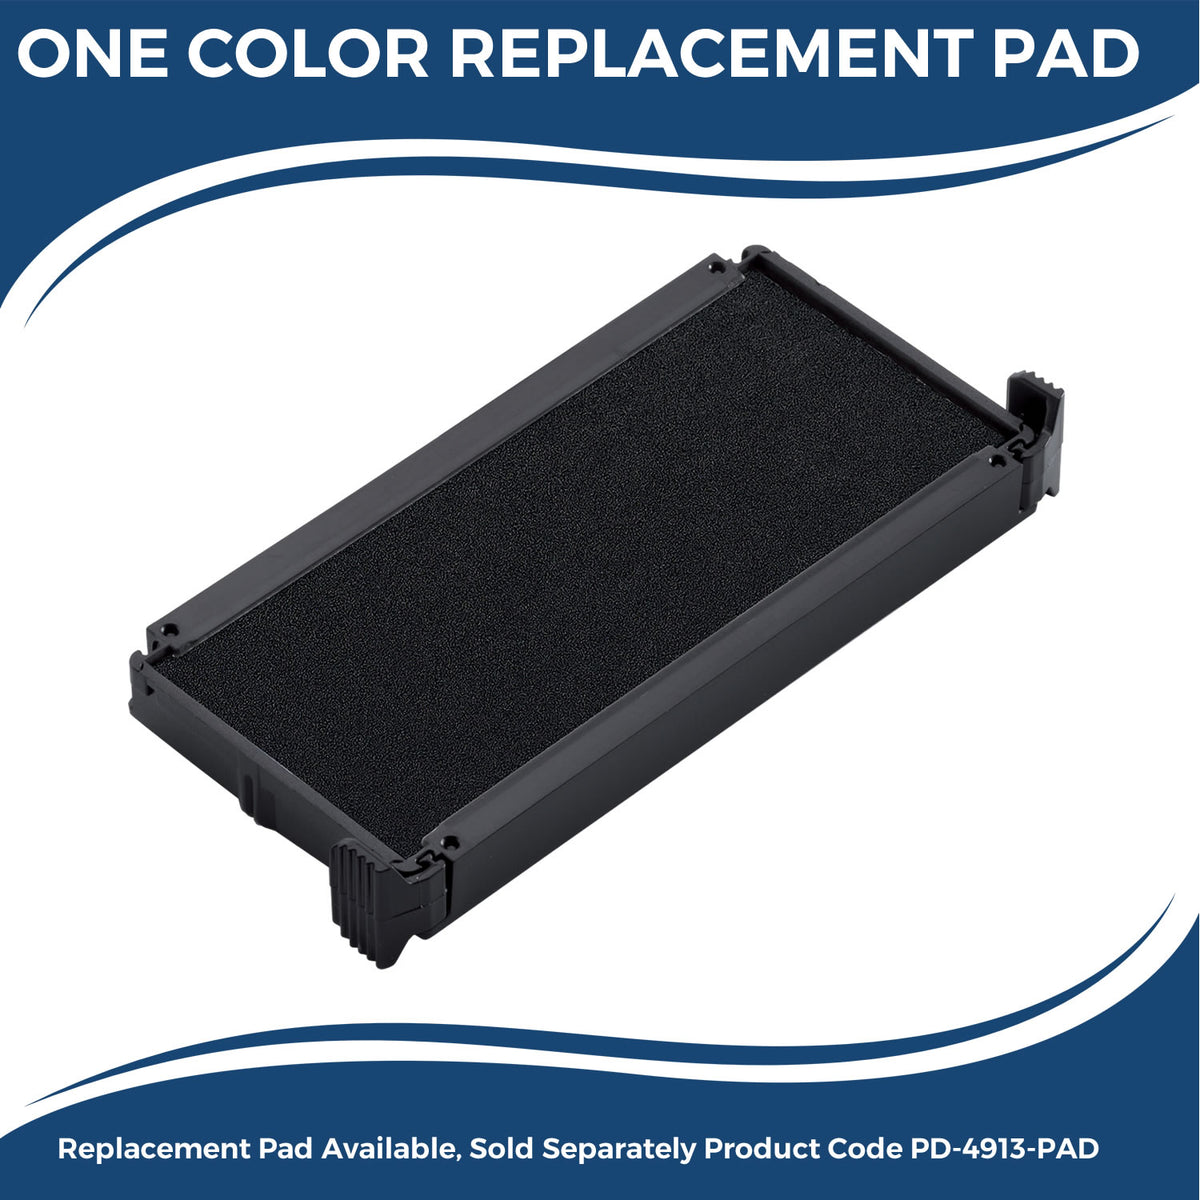 Large Self Inking Fragile Stamp 4134S Large Replacment Pad